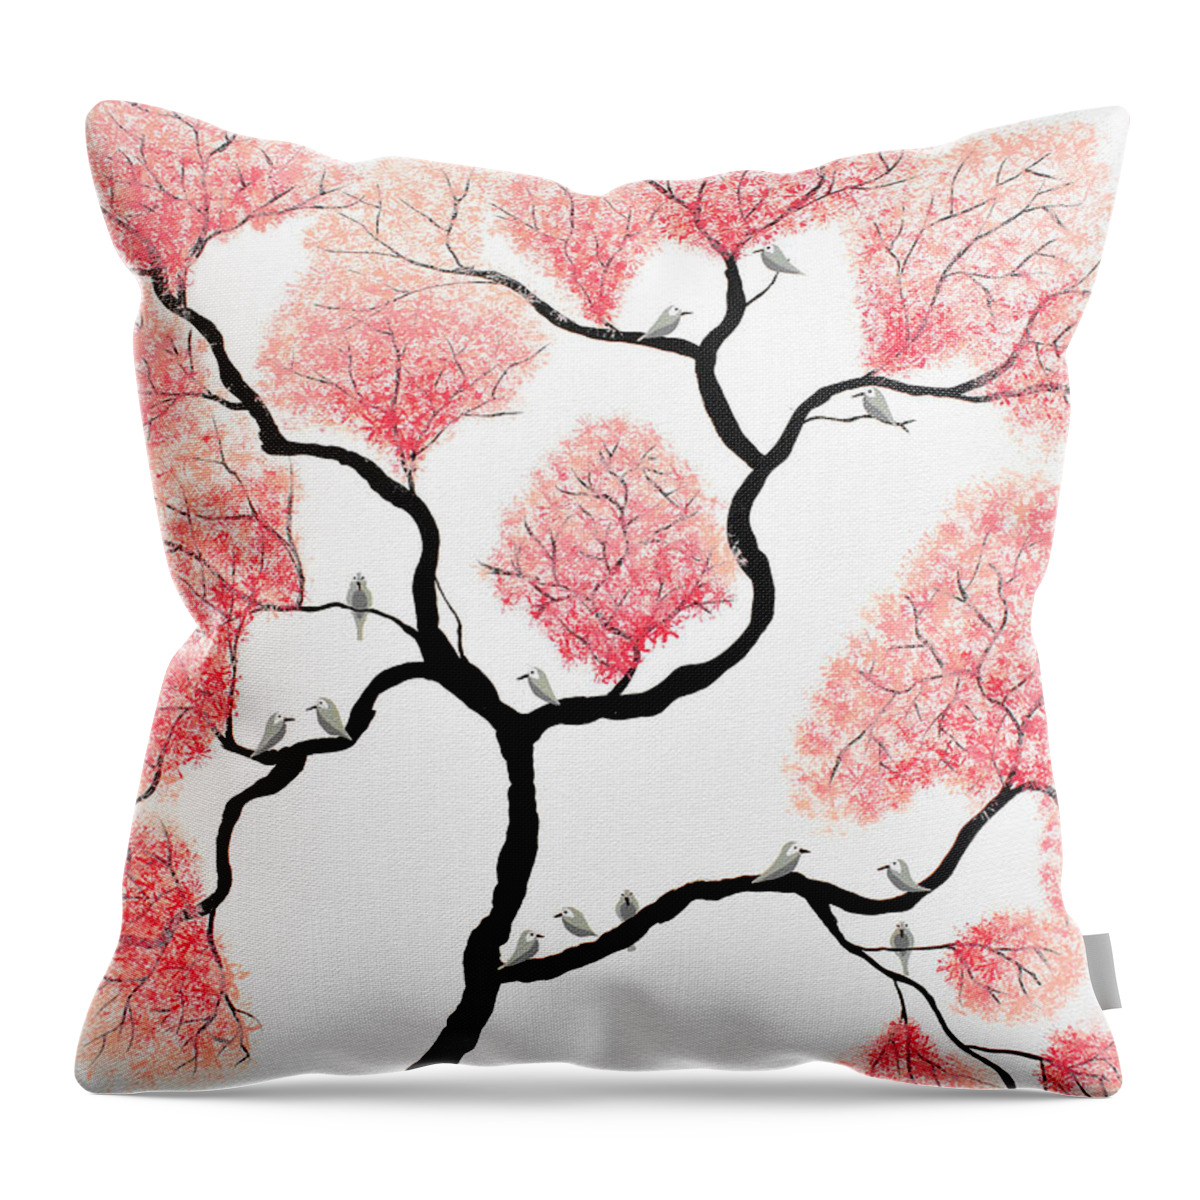 Floral Throw Pillow featuring the painting Birds and flowers by Sumit Mehndiratta